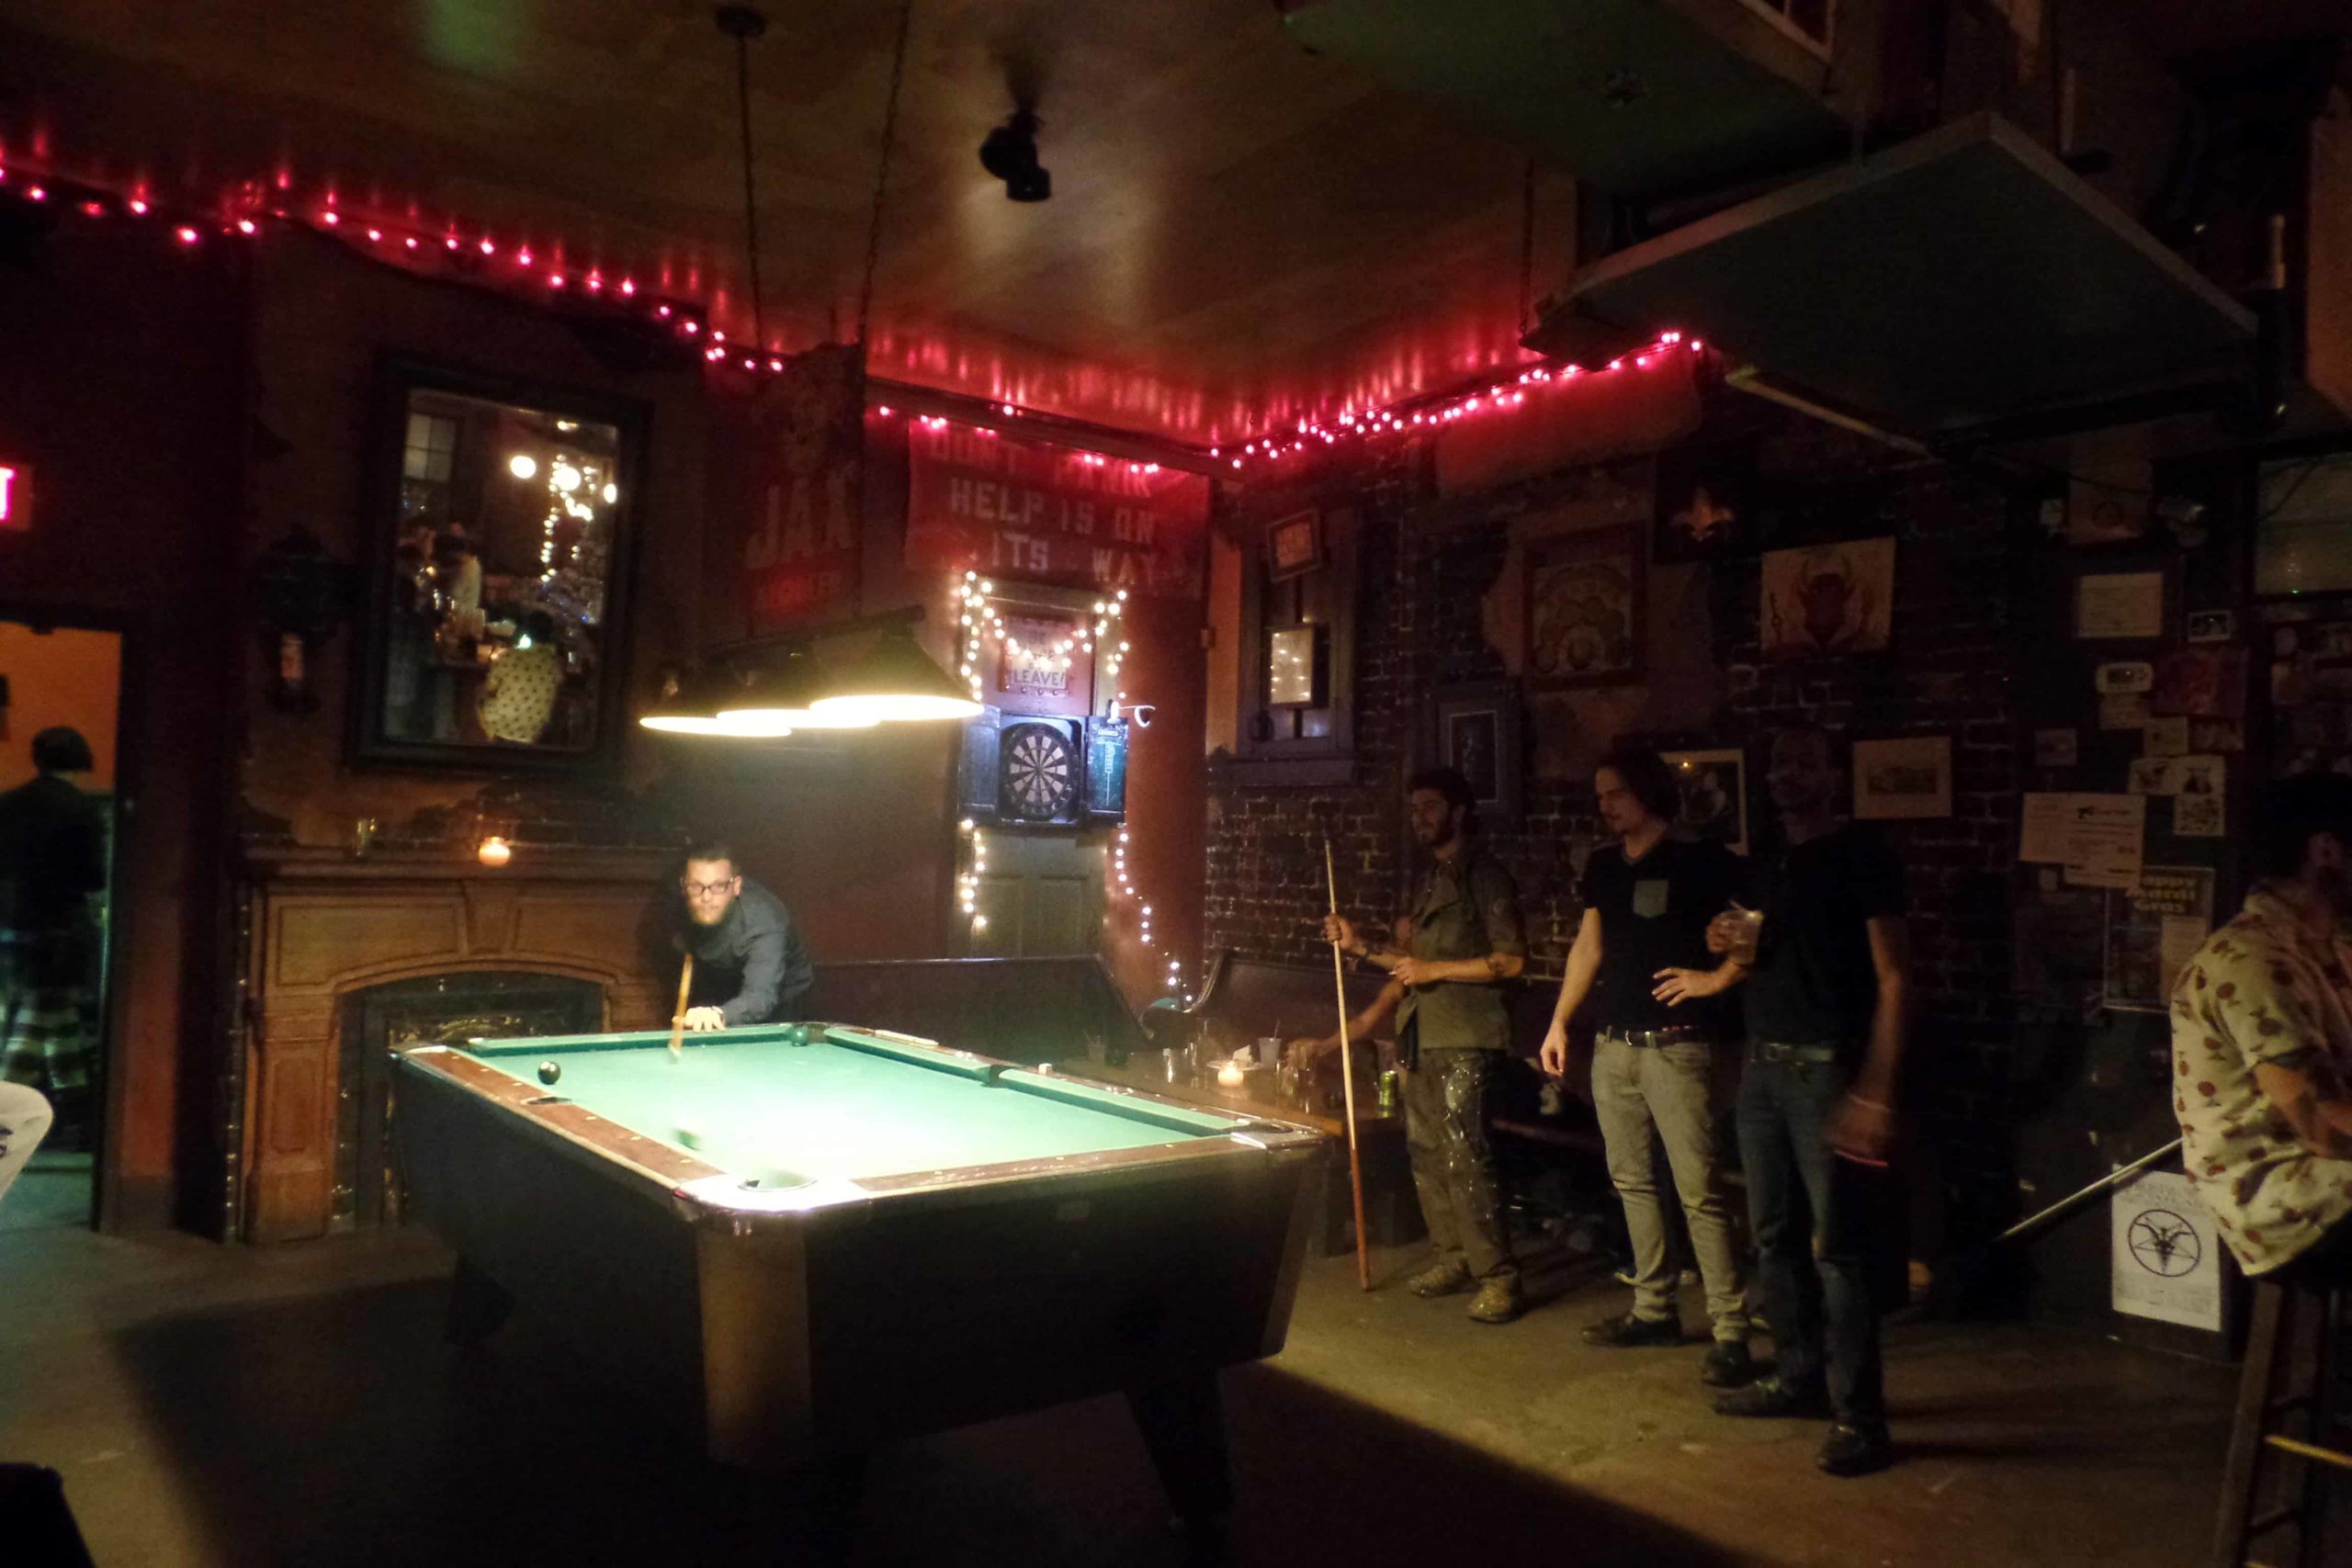 Getting some pool in at Mimi's in the Marigny. (image copyright The Whiskey Wash/Joshua Sparks)